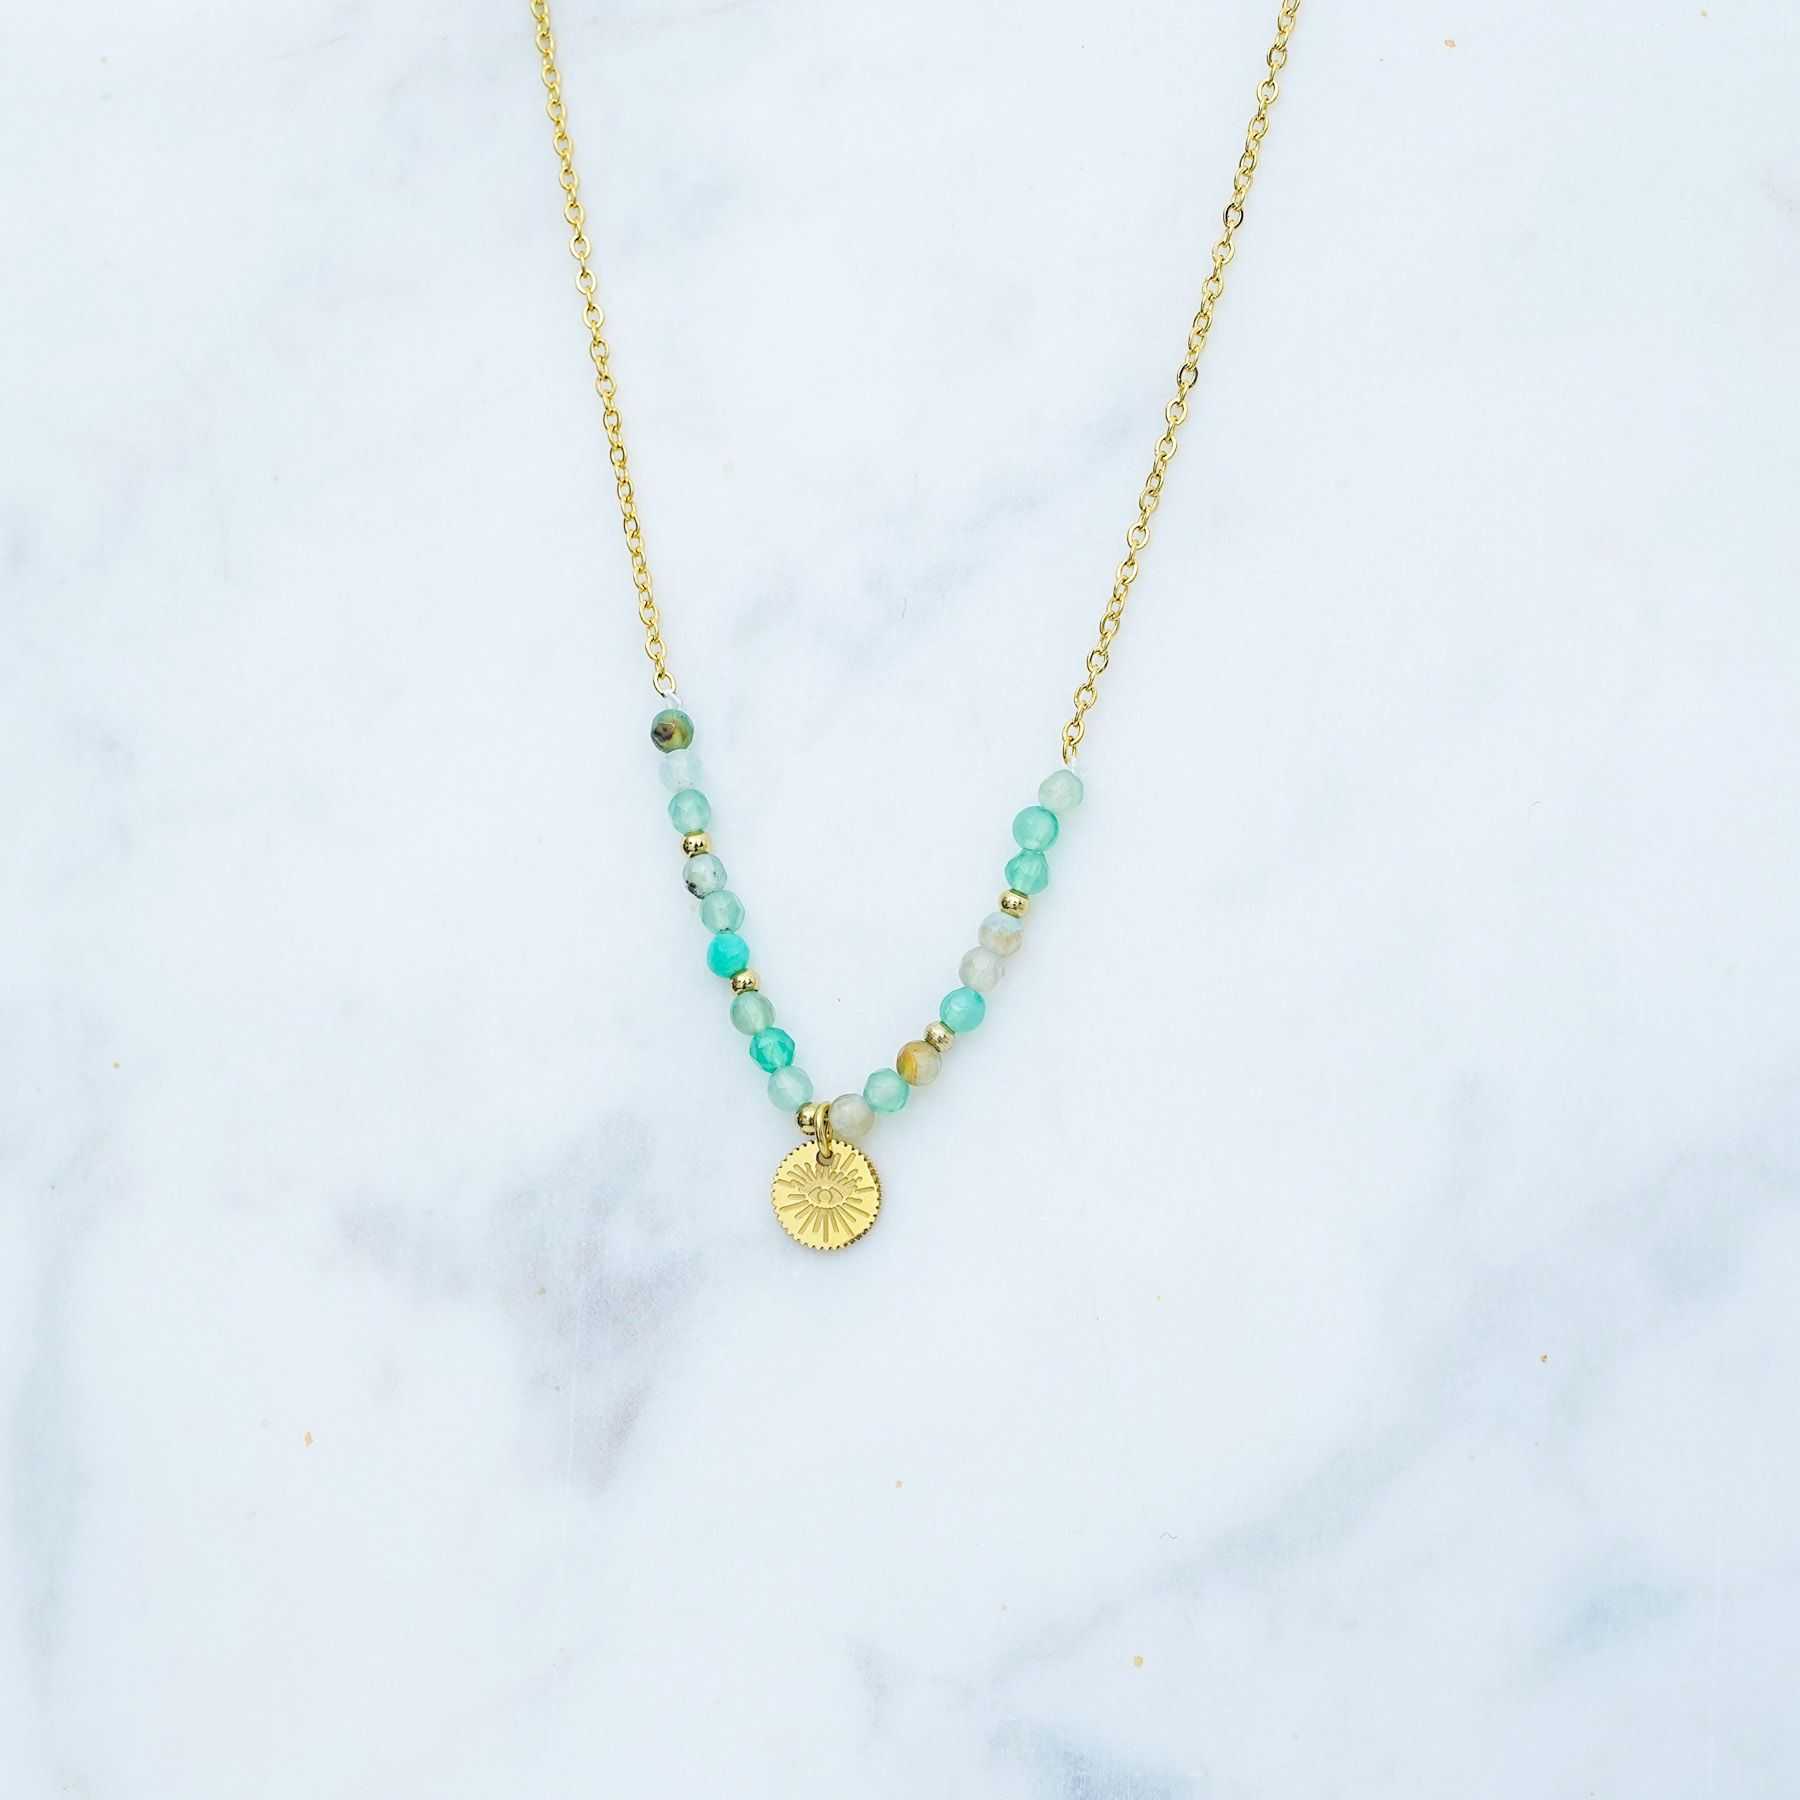 BALI NECKLACE - GOLD & LIGHT GREEN